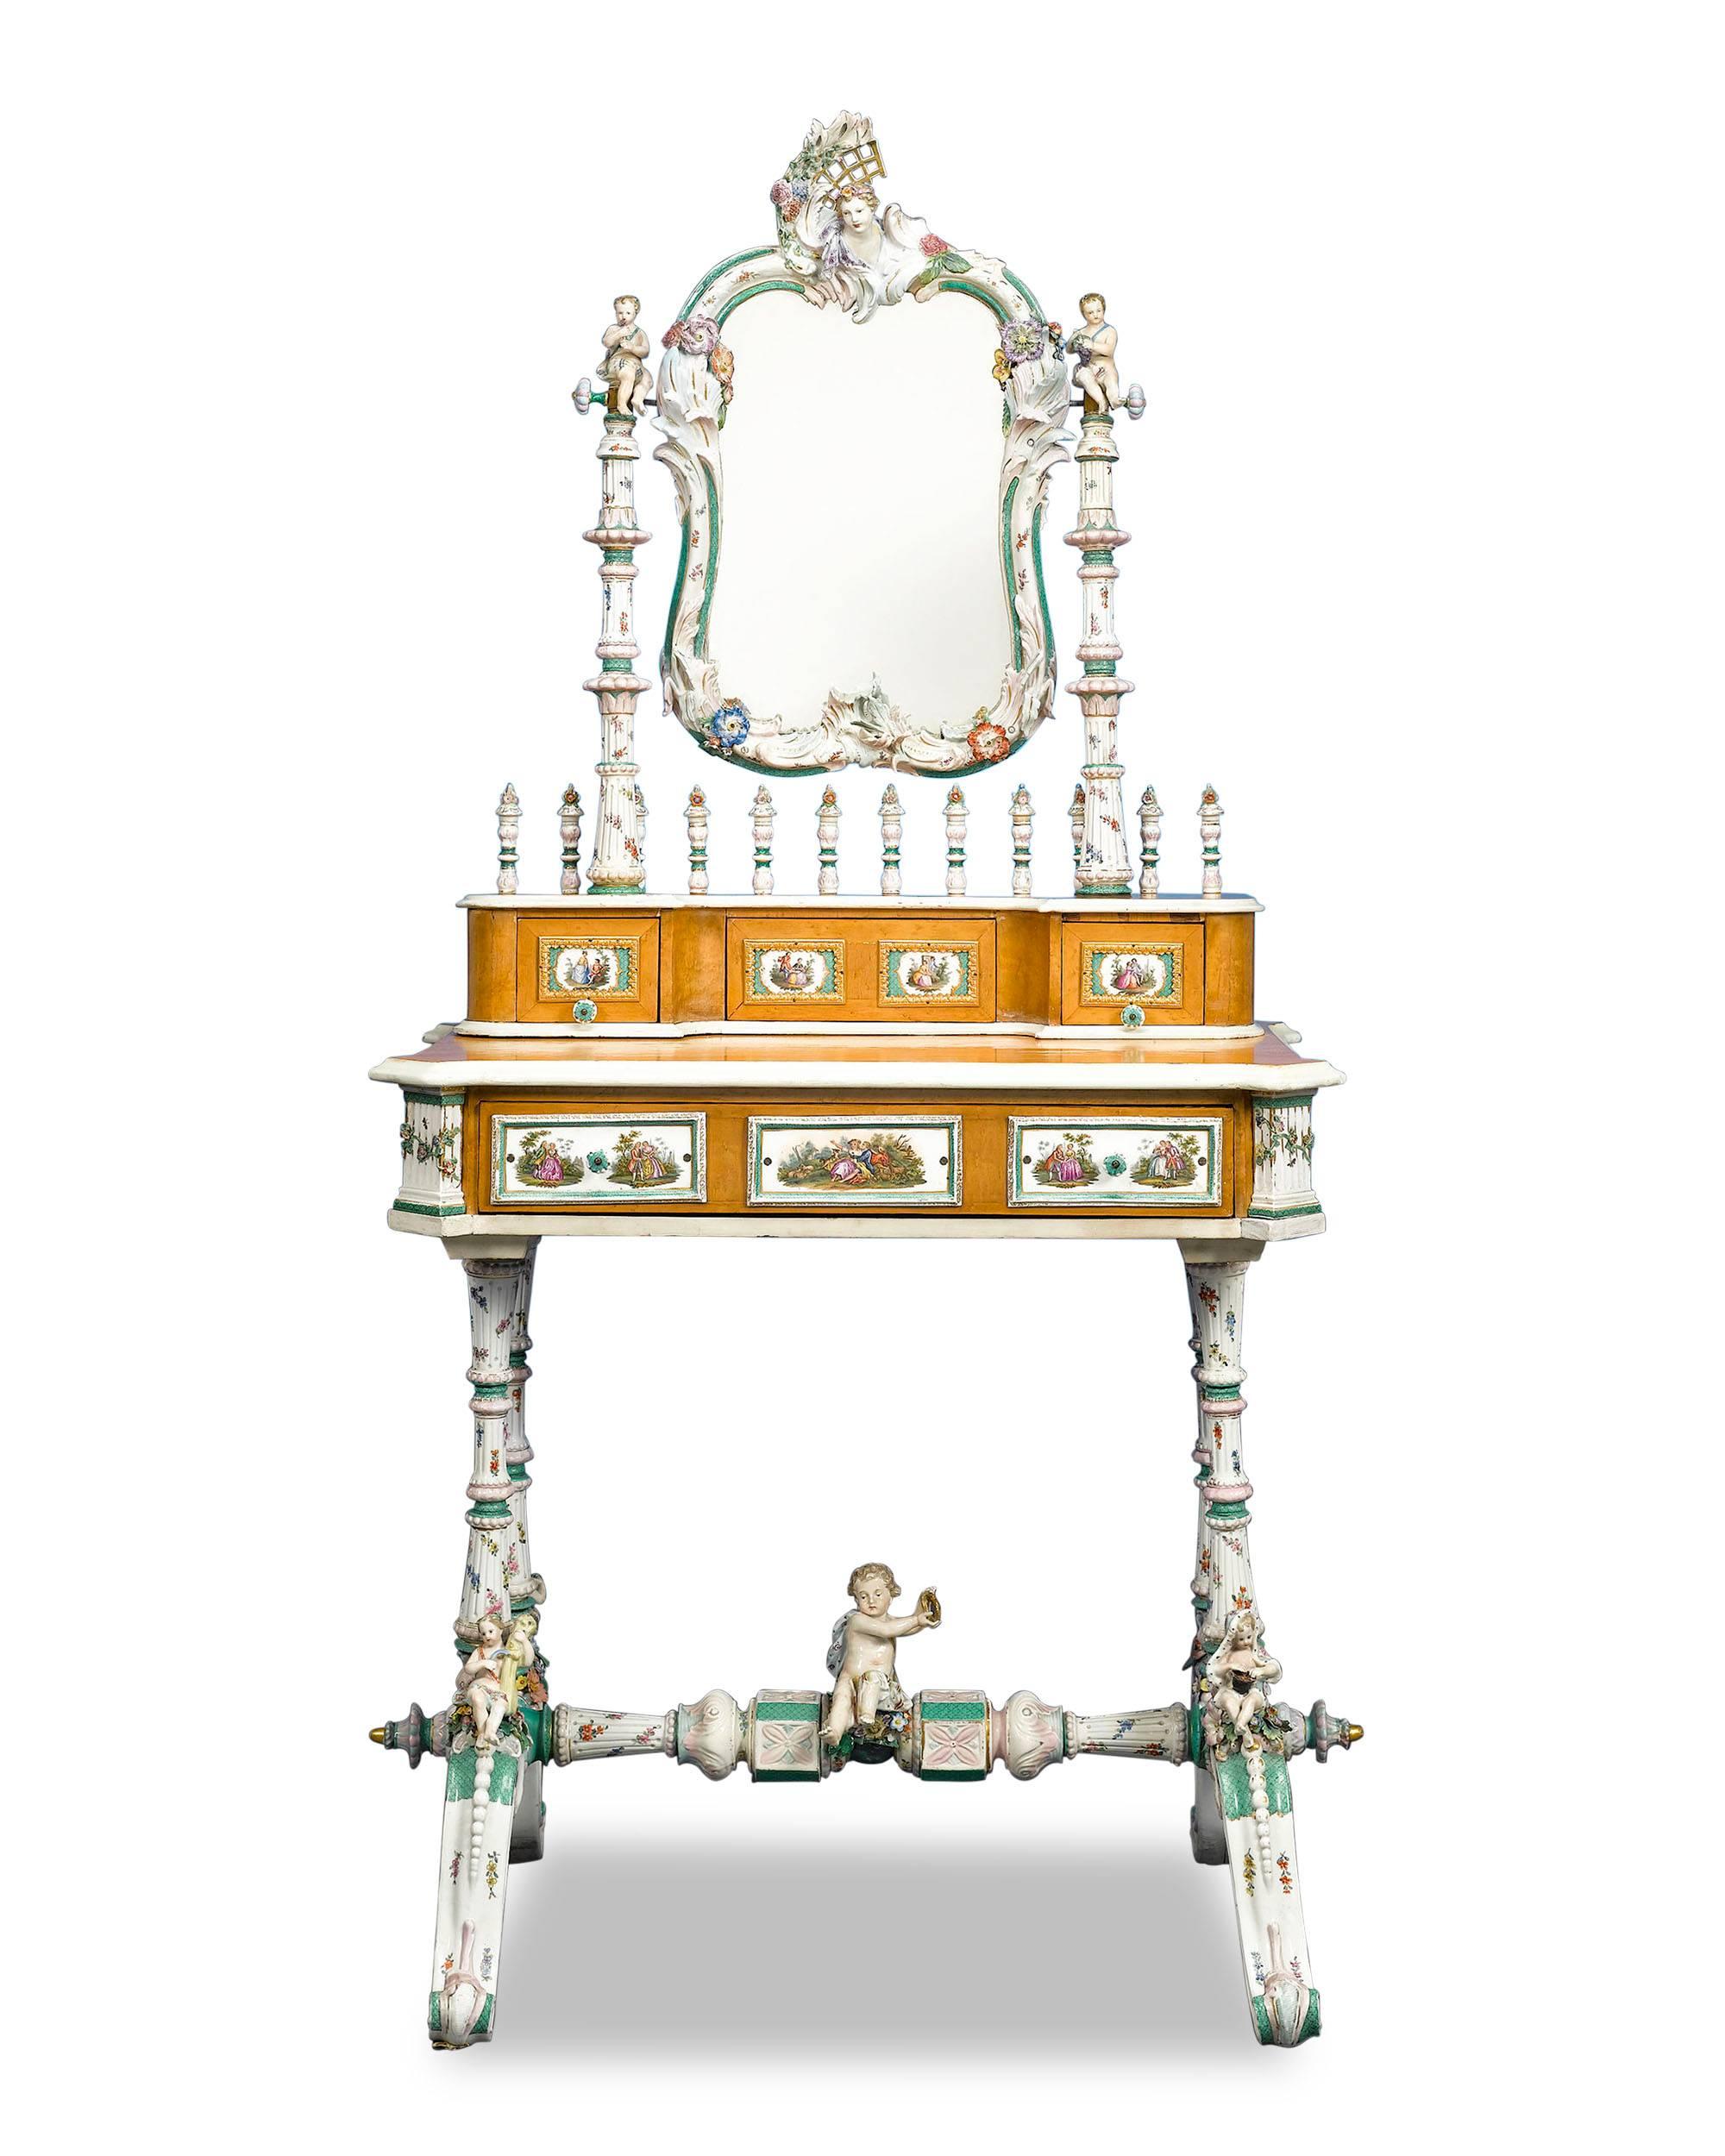 This lavish bird's-eye maple dressing table is a work of astounding artistry and rarity. The piece is elaborately embellished with exquisite Meissen Porcelain throughout. Exquisitely hand-painted with gilt accents, the cartouche-form mirror frame is